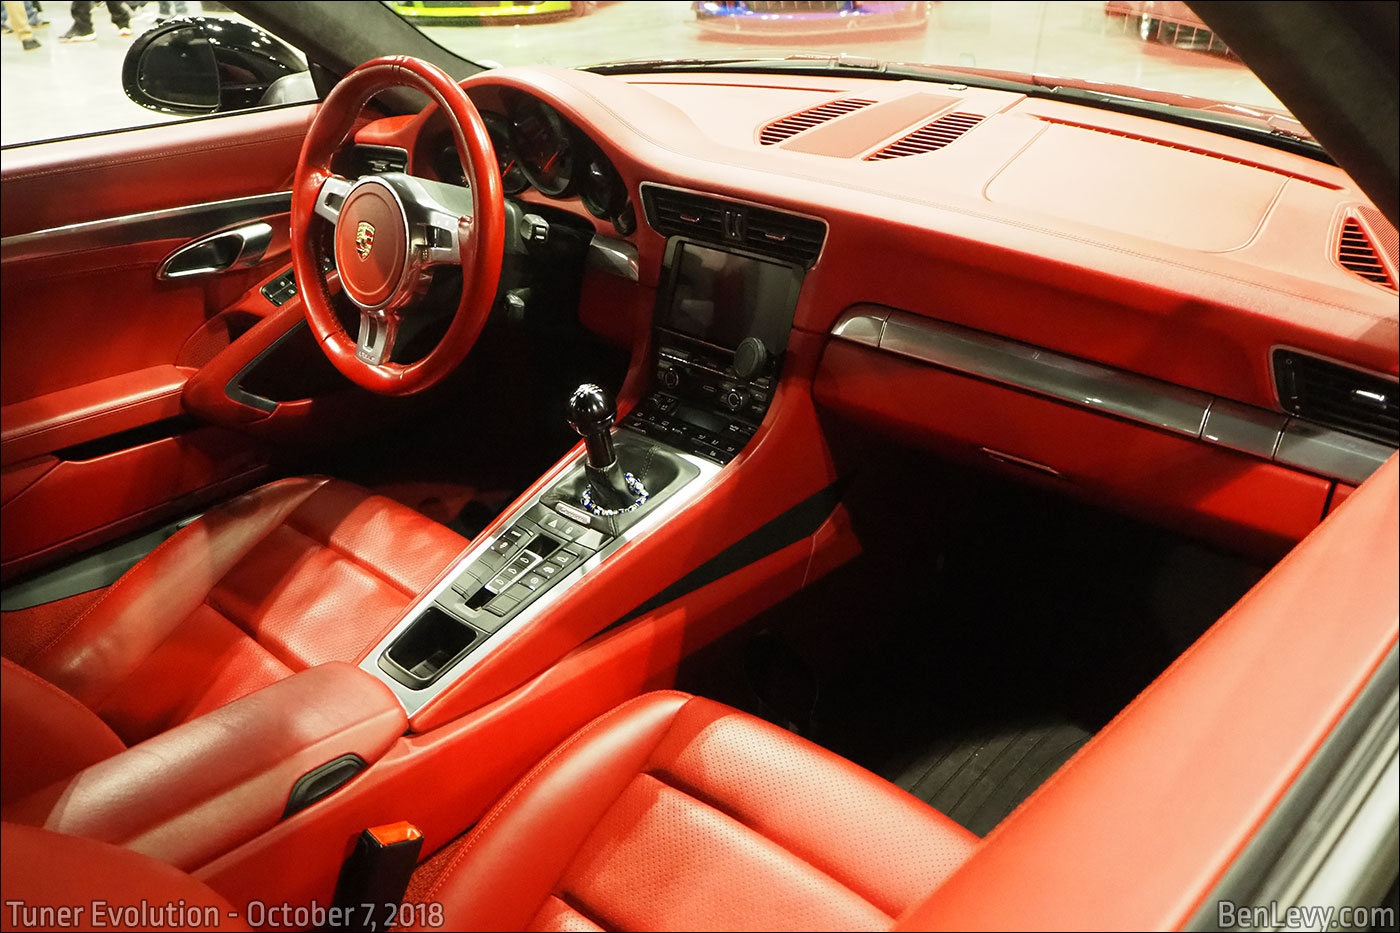 Porsche 911 with red leather interior